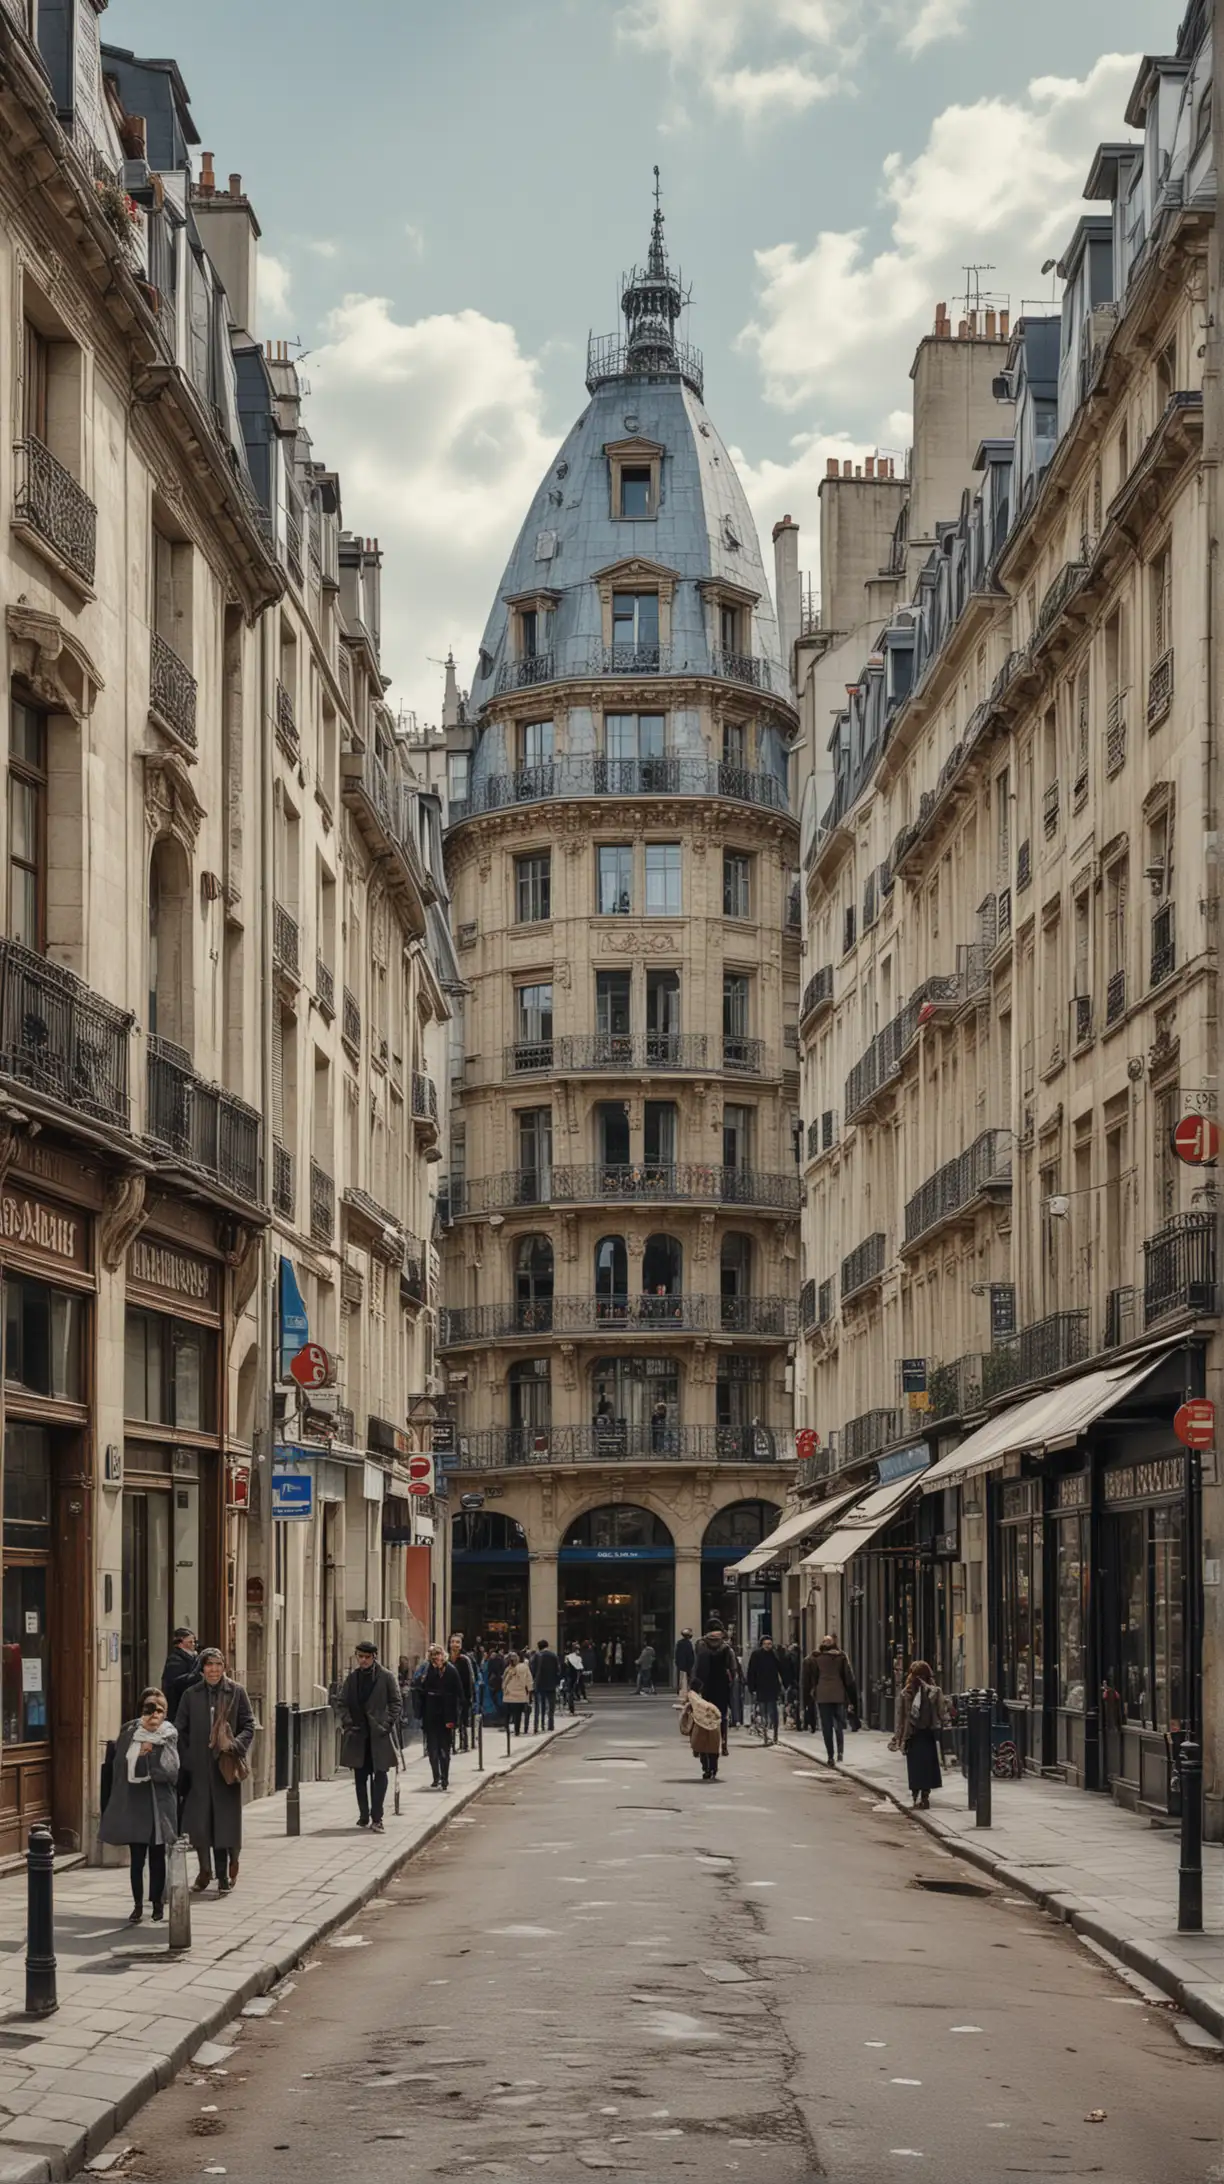 Historical Paris Street with Tower Under Construction and City Life